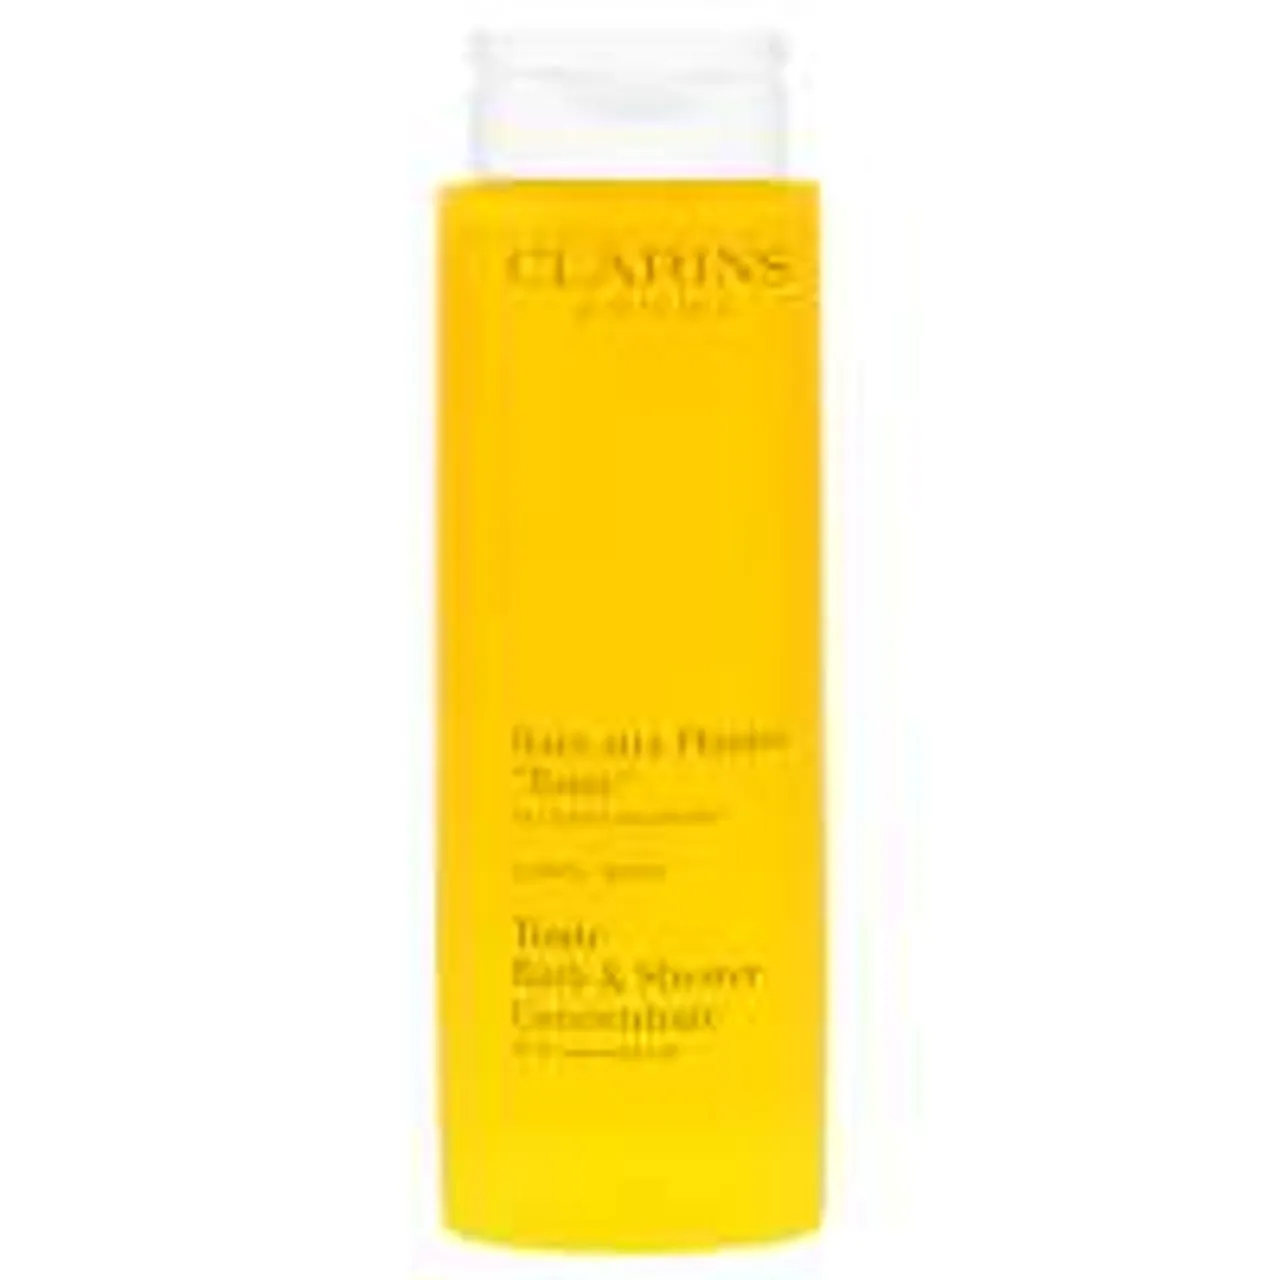 Clarins Bath and Shower Tonic Bath and Shower Concentrate 200ml / 6.8 fl.oz.